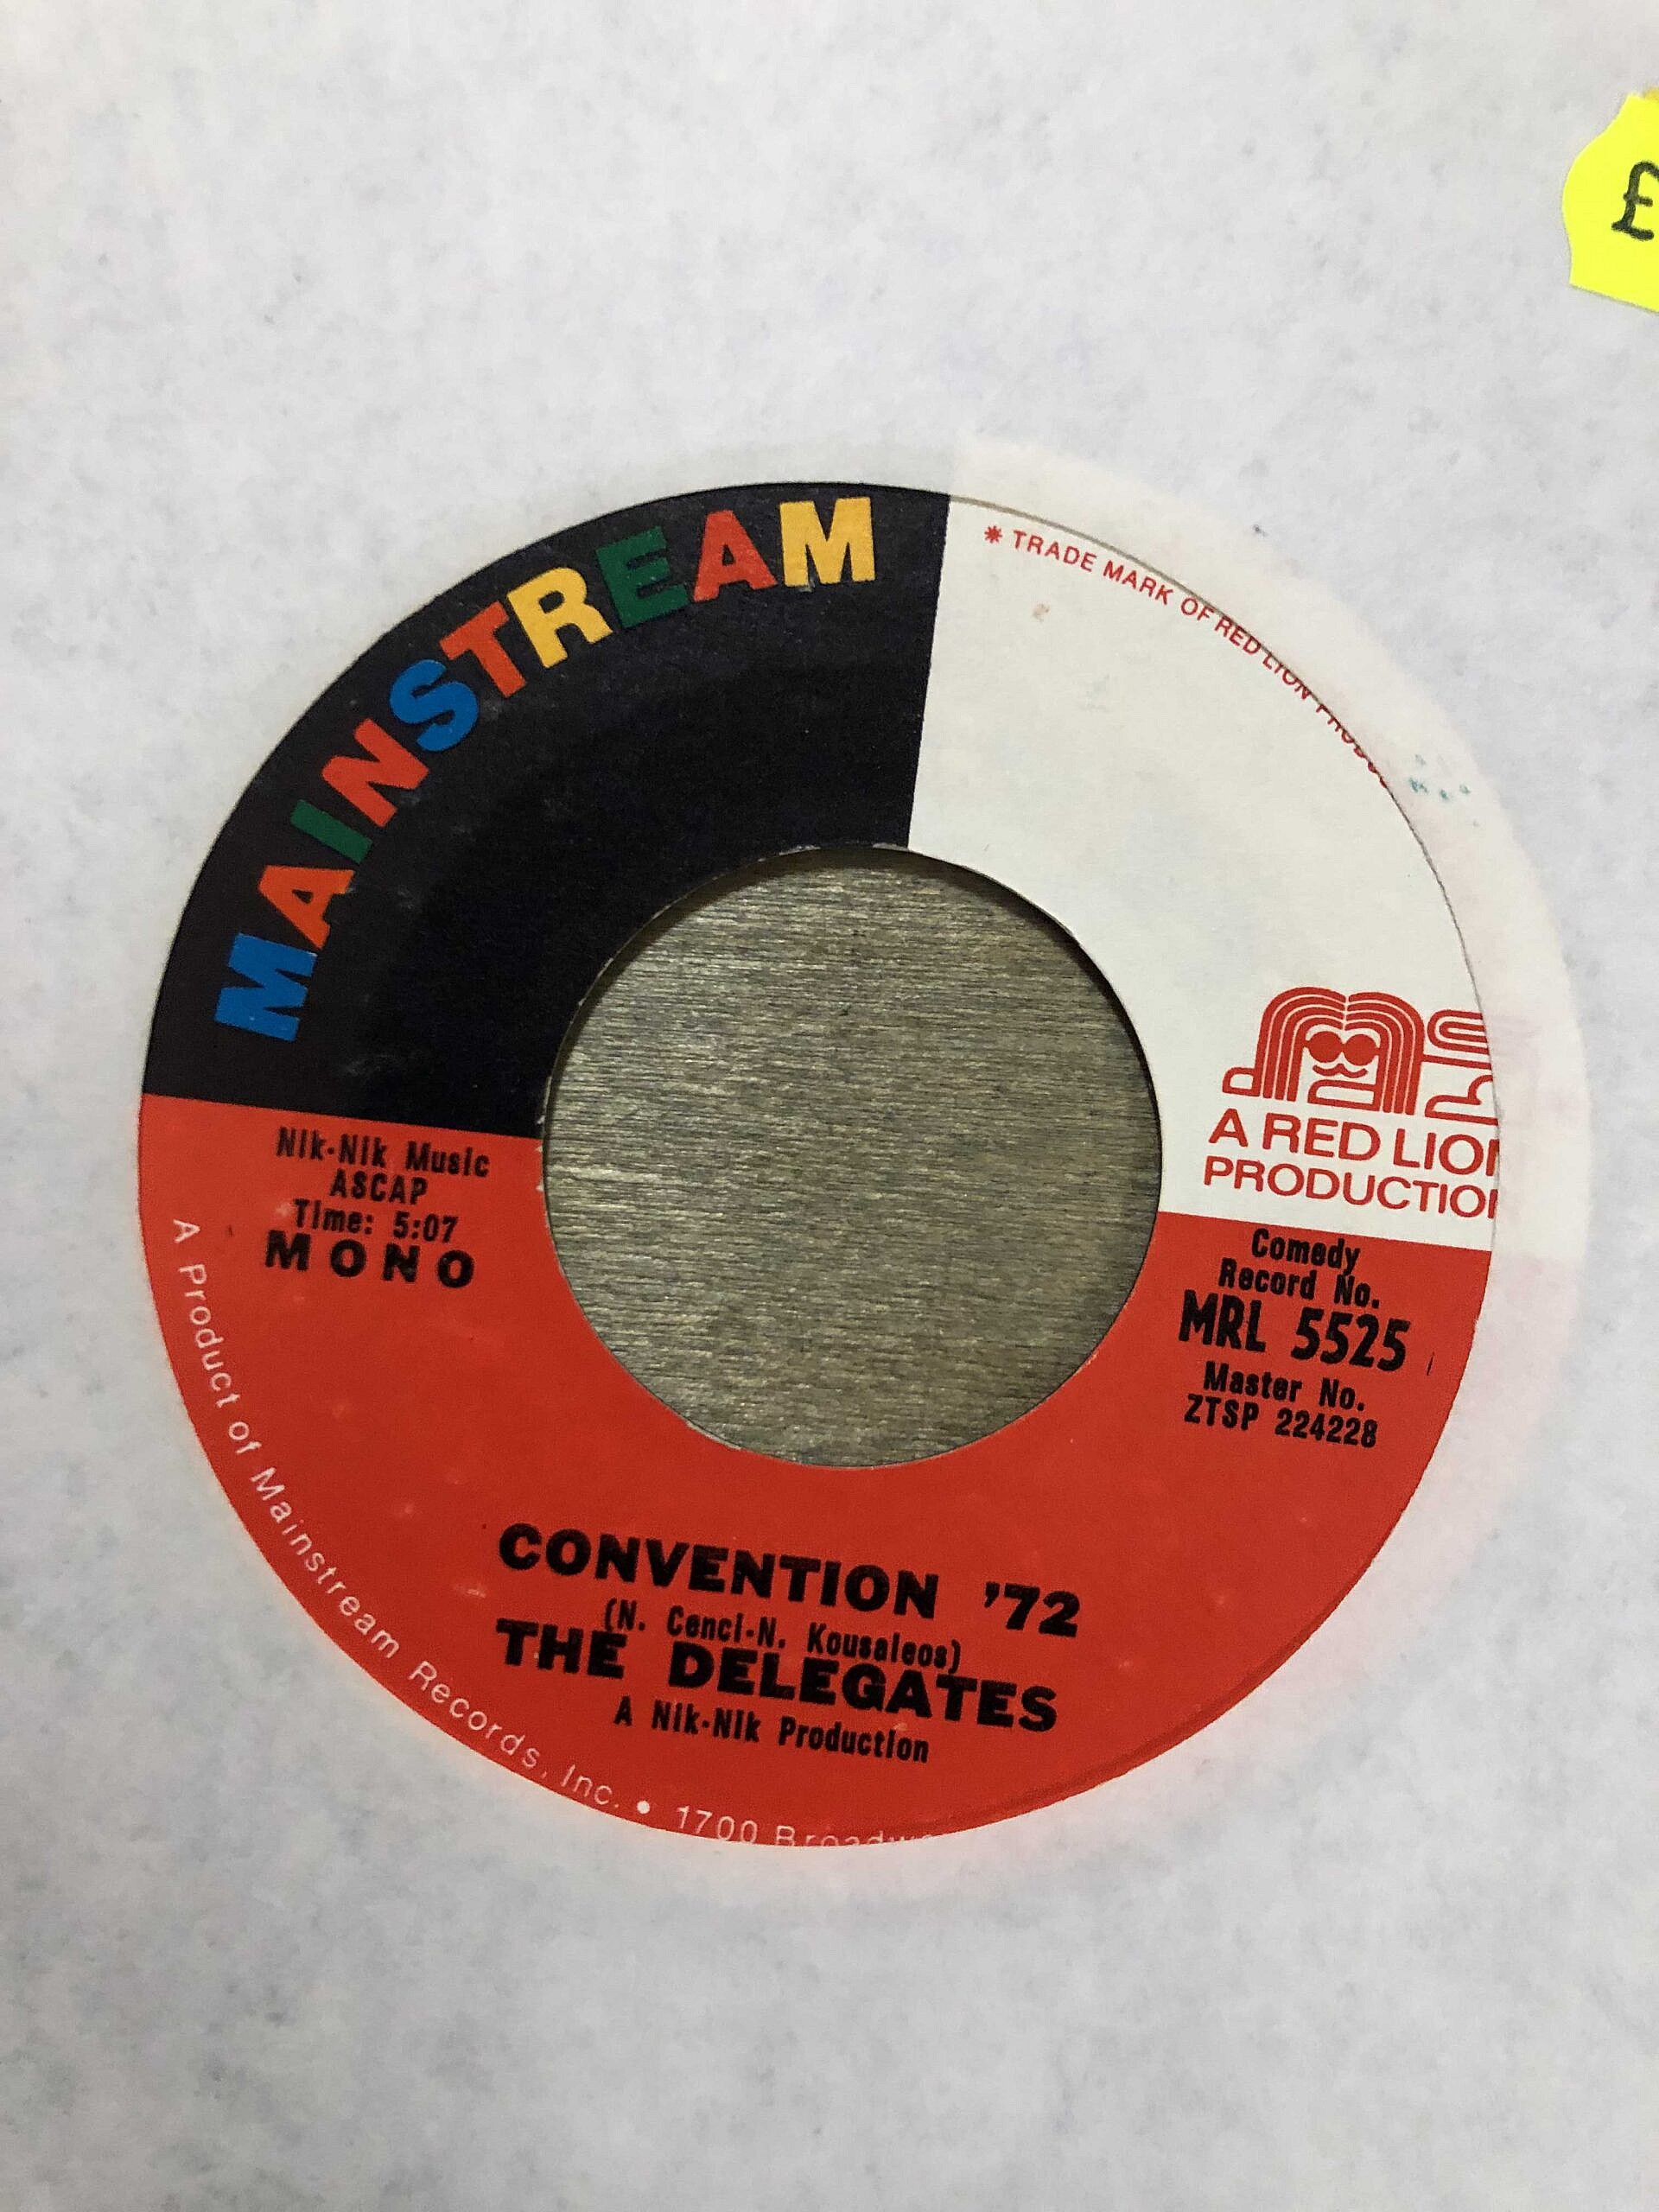 Funky Butt/Convention 72